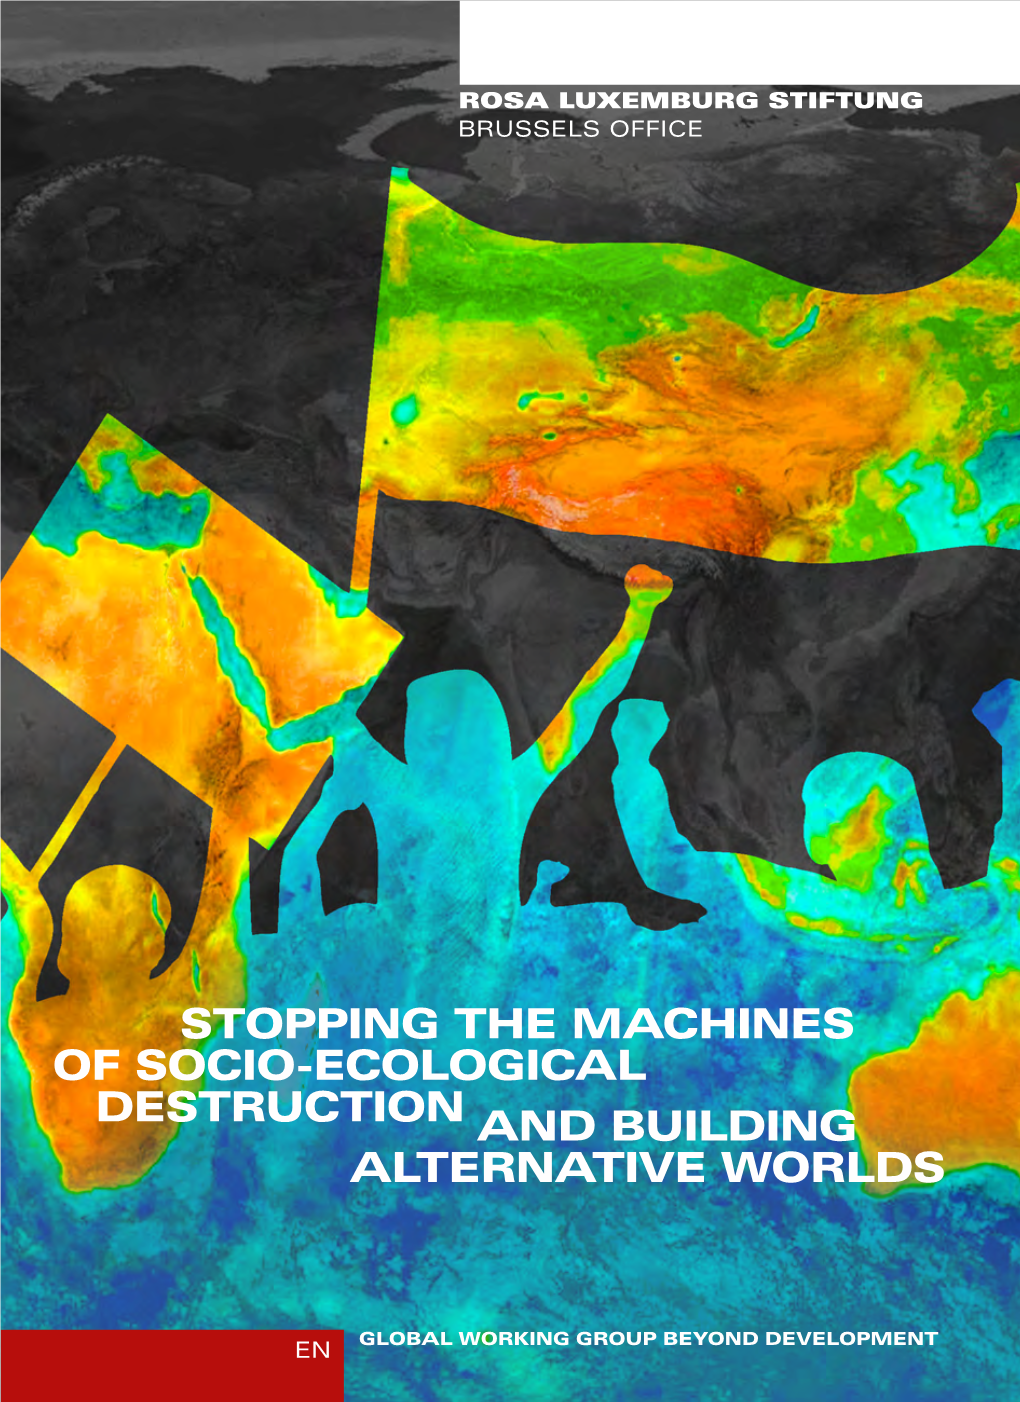 Stopping the Machines of Socio-Ecological Destruction and Building Alternative Worlds